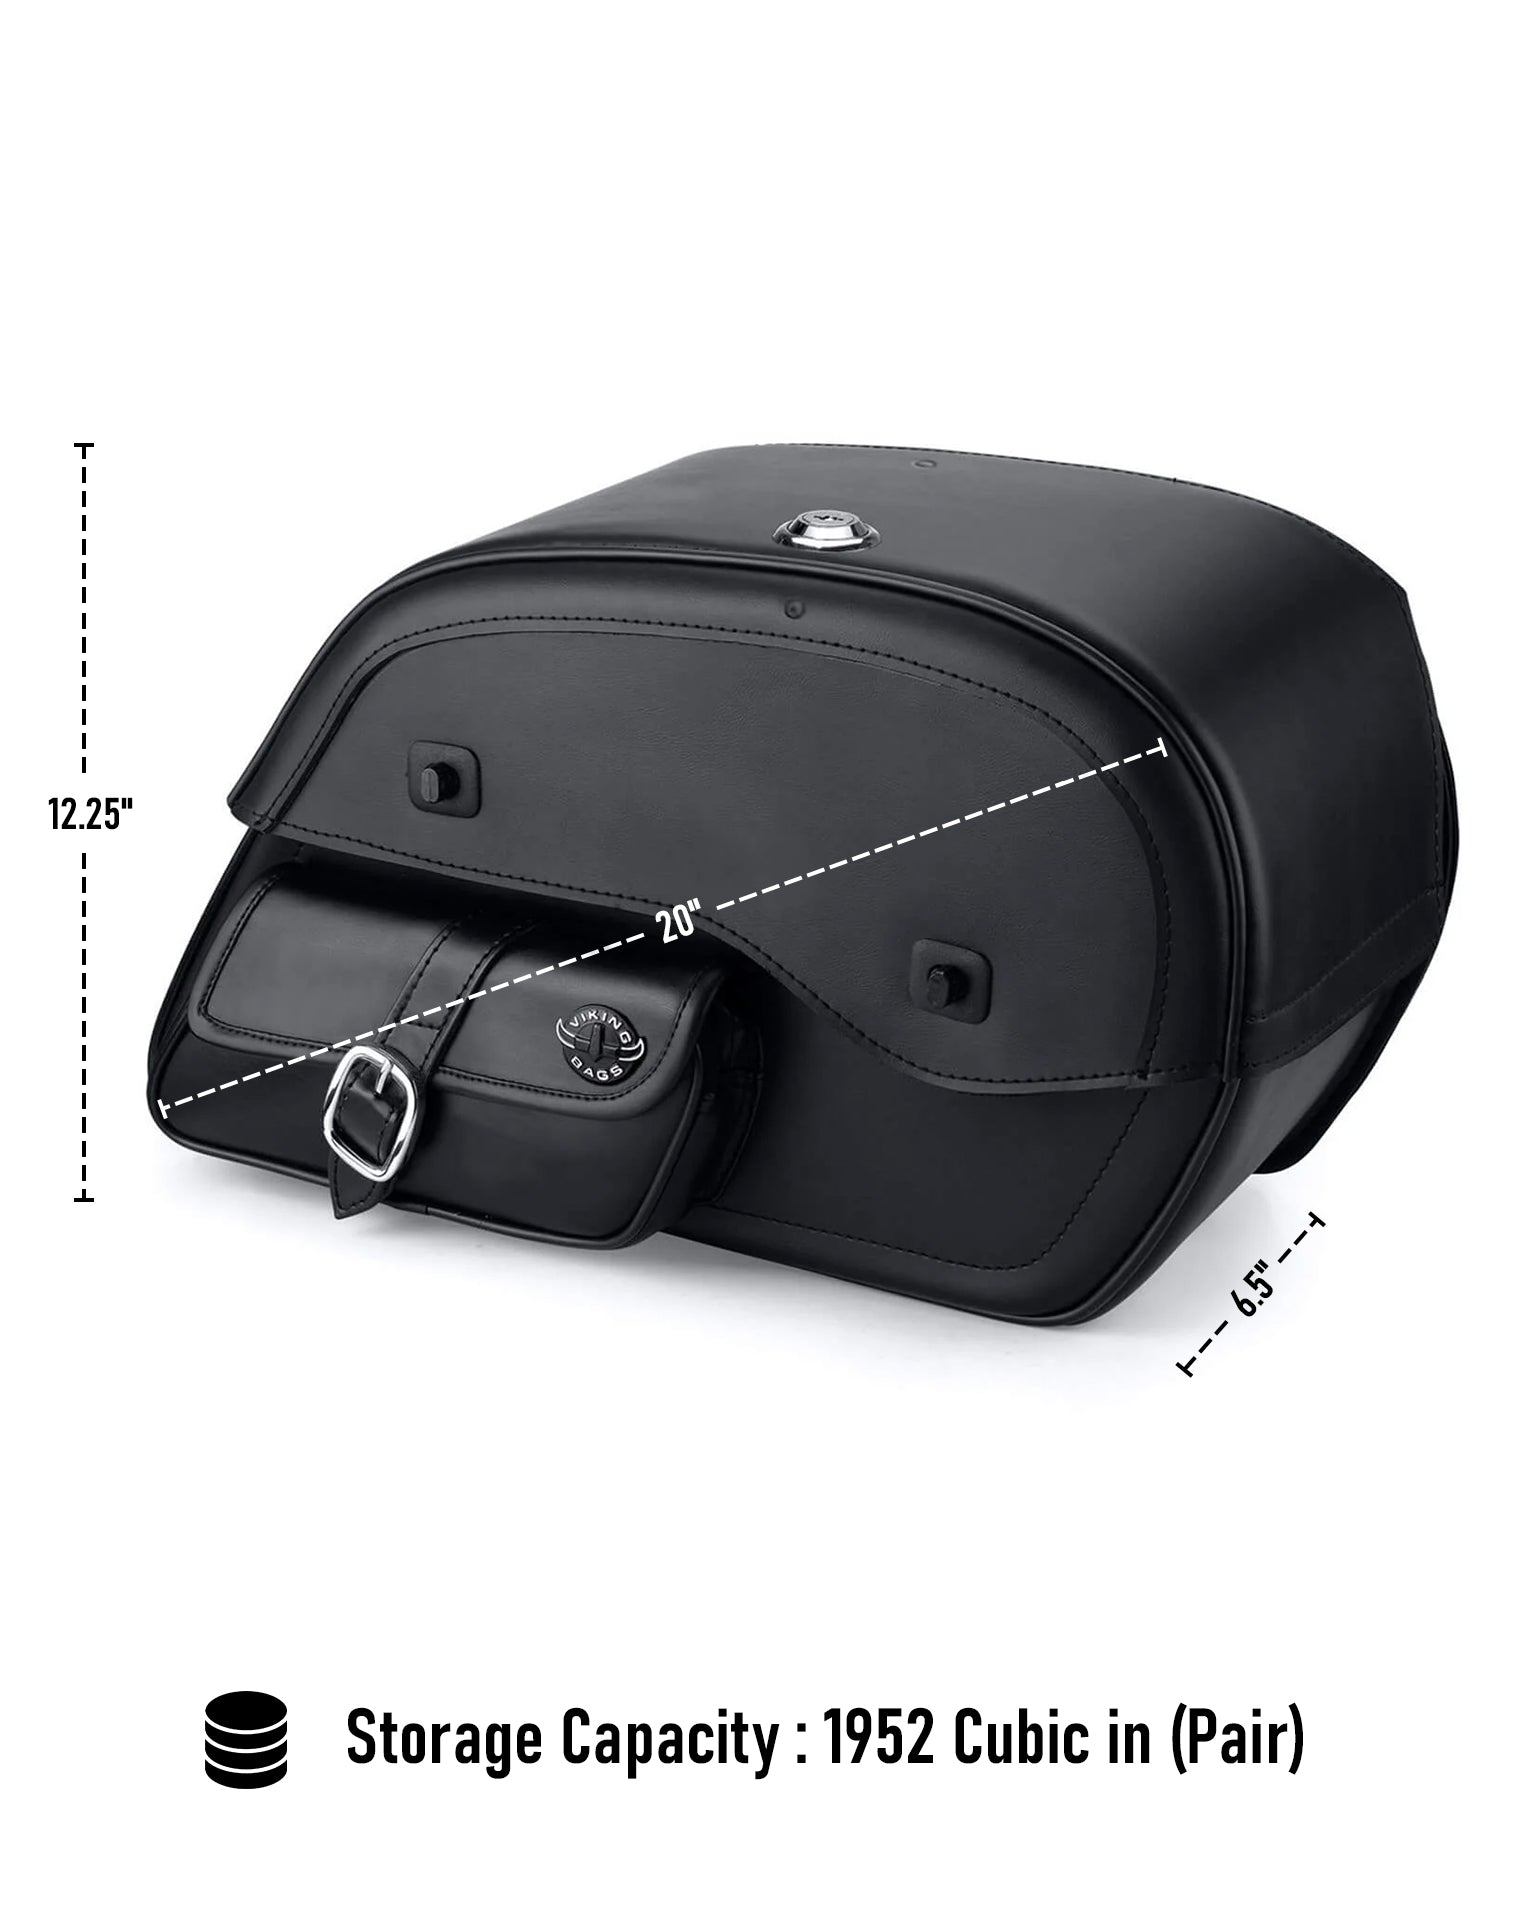 Viking Essential Side Pocket Large Suzuki Boulevard C50 Vl800 Leather Motorcycle Saddlebags Can Store Your Ridings Gears